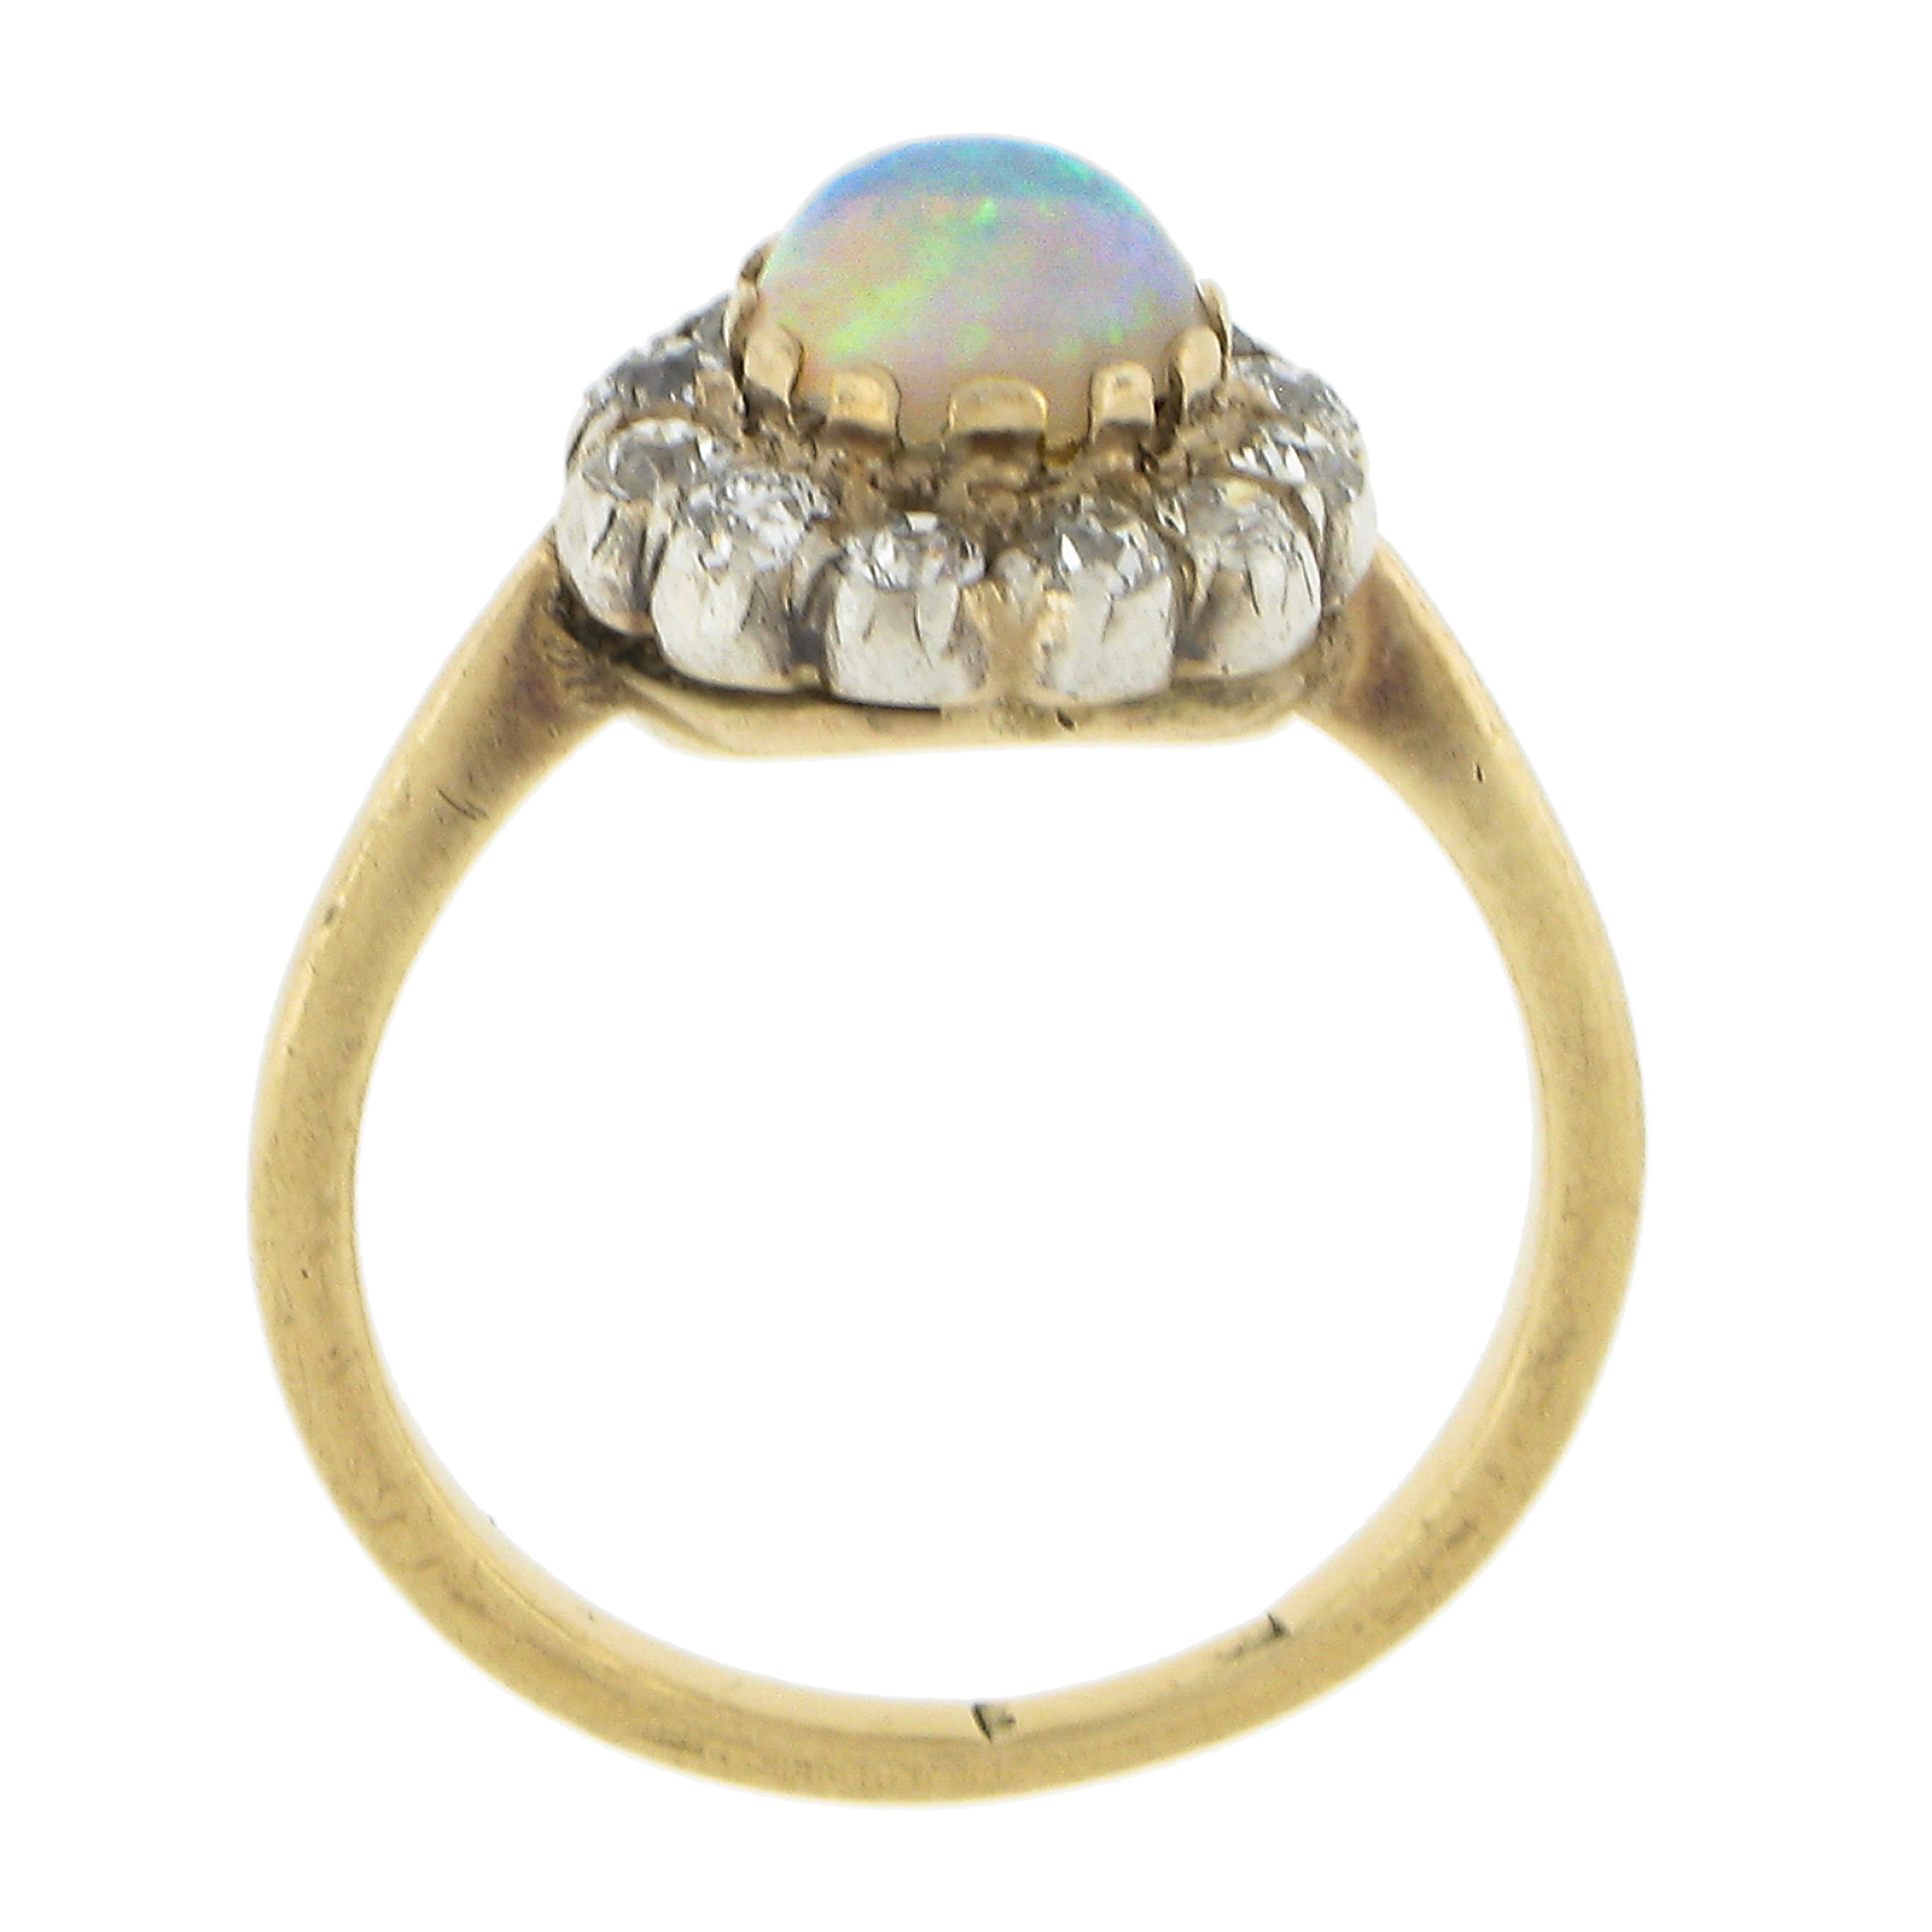 Antique Victorian 9K Gold Round Opal Solitaire w/ Old Cut Diamond Halo Ring 3